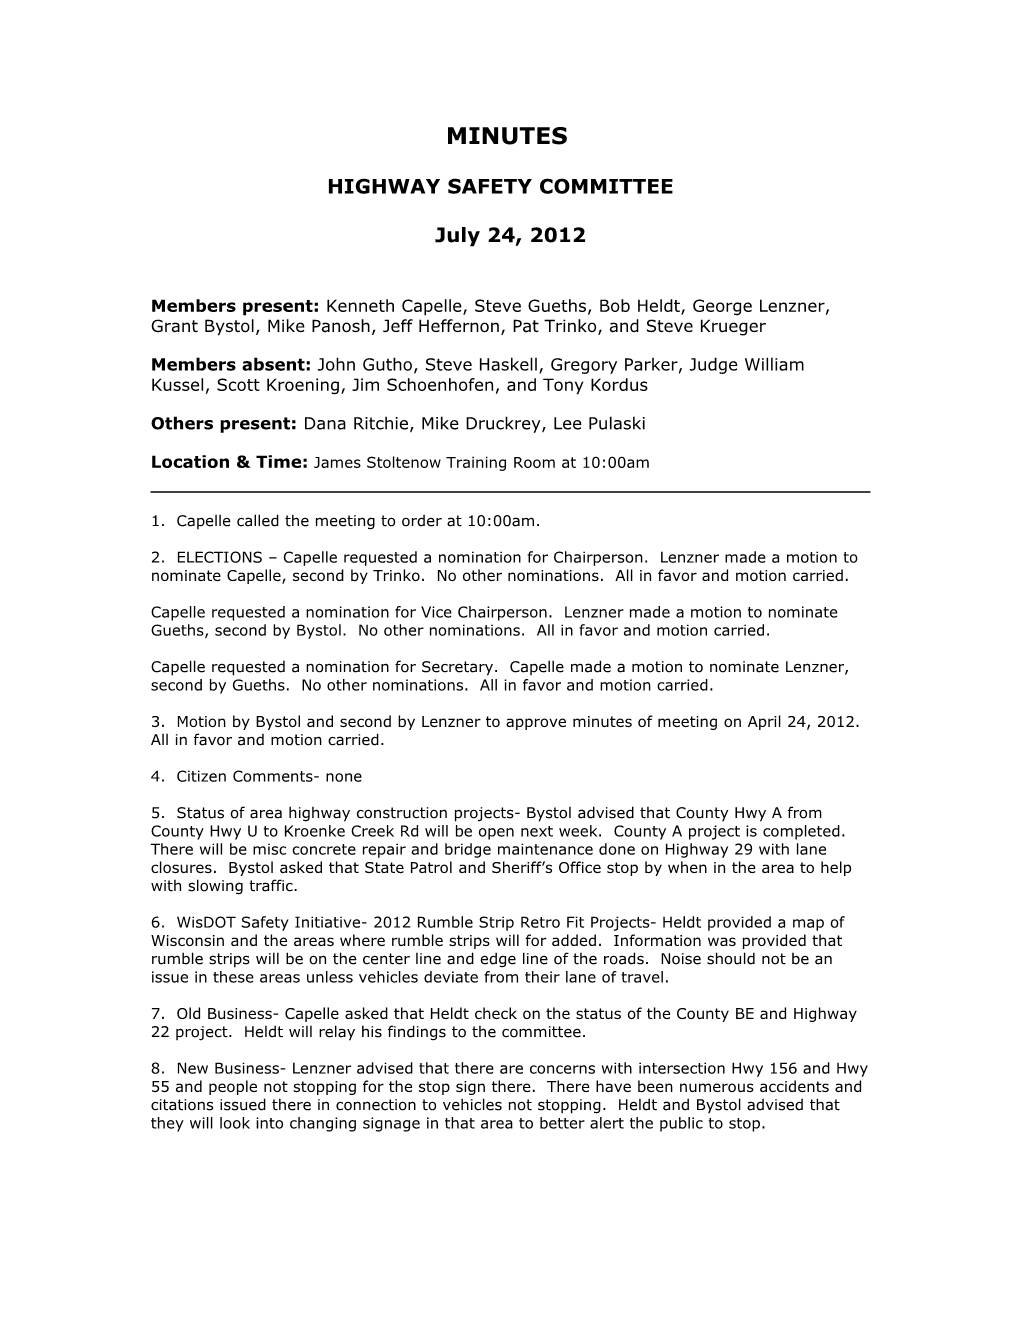 Highway Safety Committee